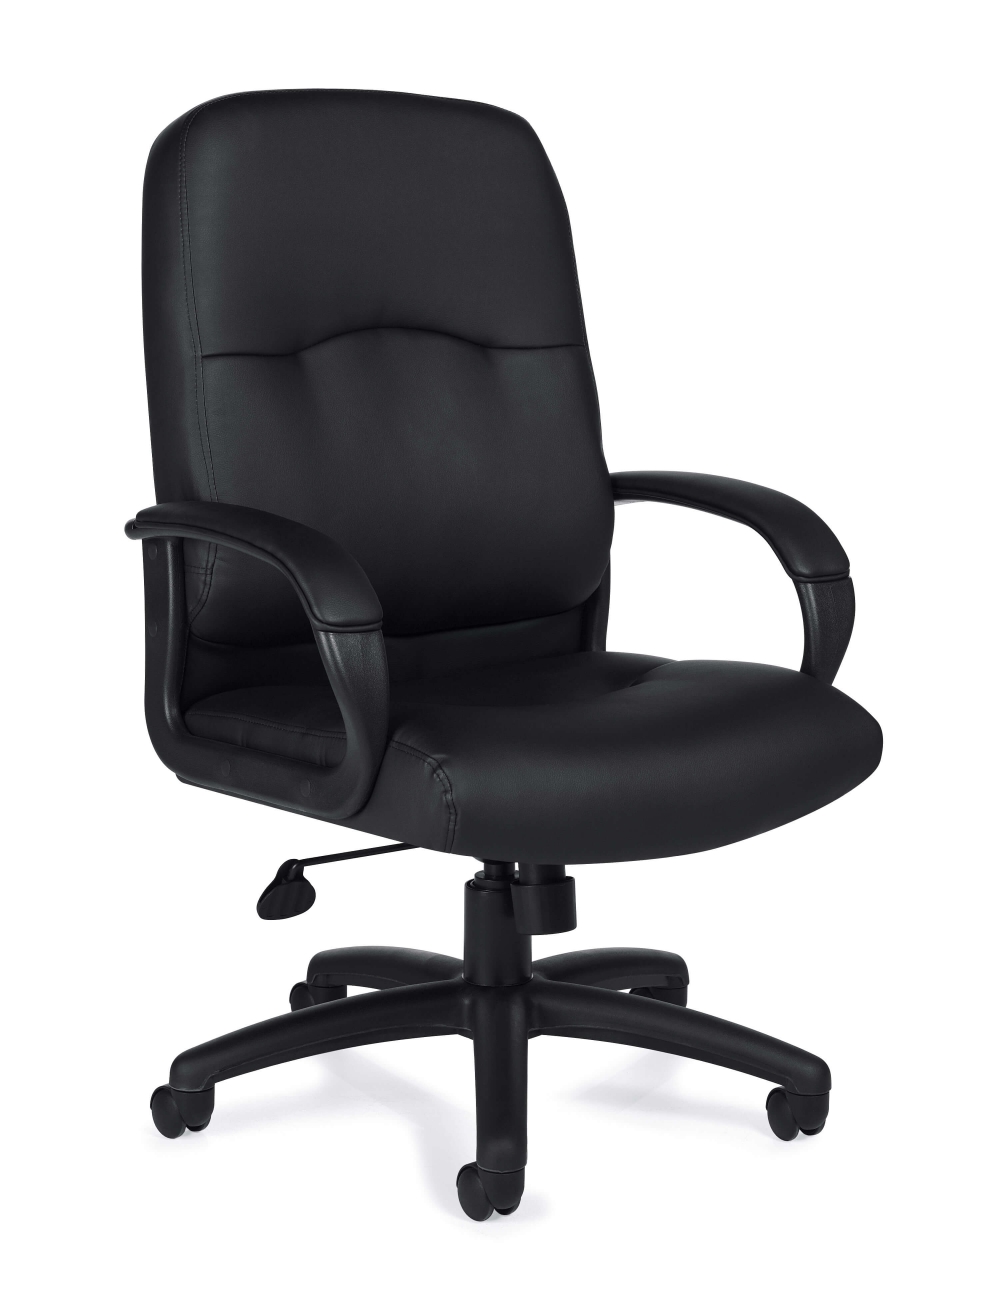 office-furniture-chairs-leather-office-chair.jpg